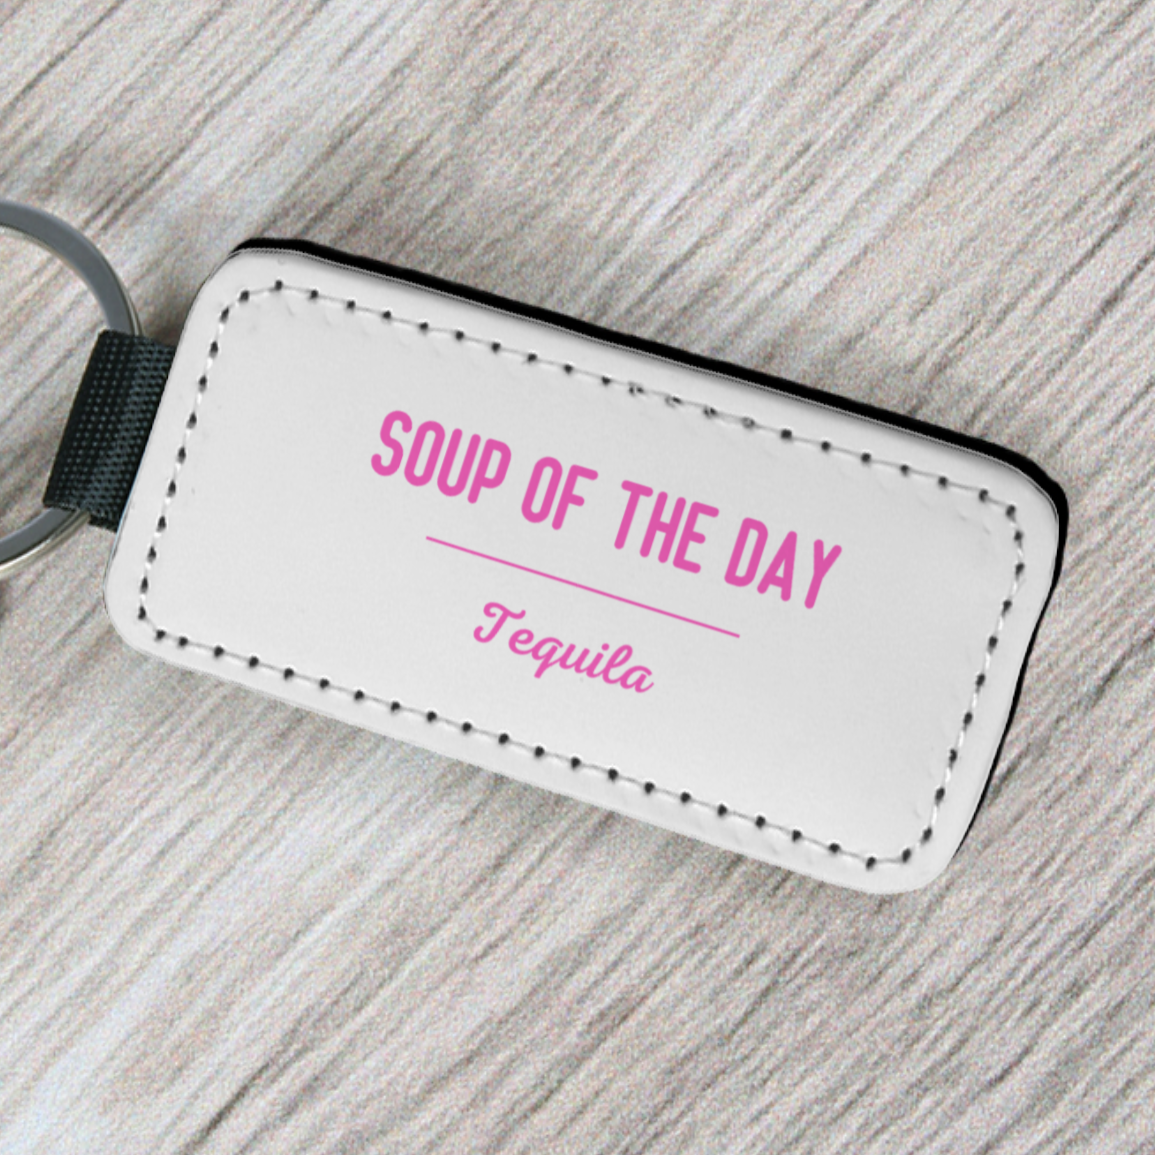 Soup of the day - Key Tag